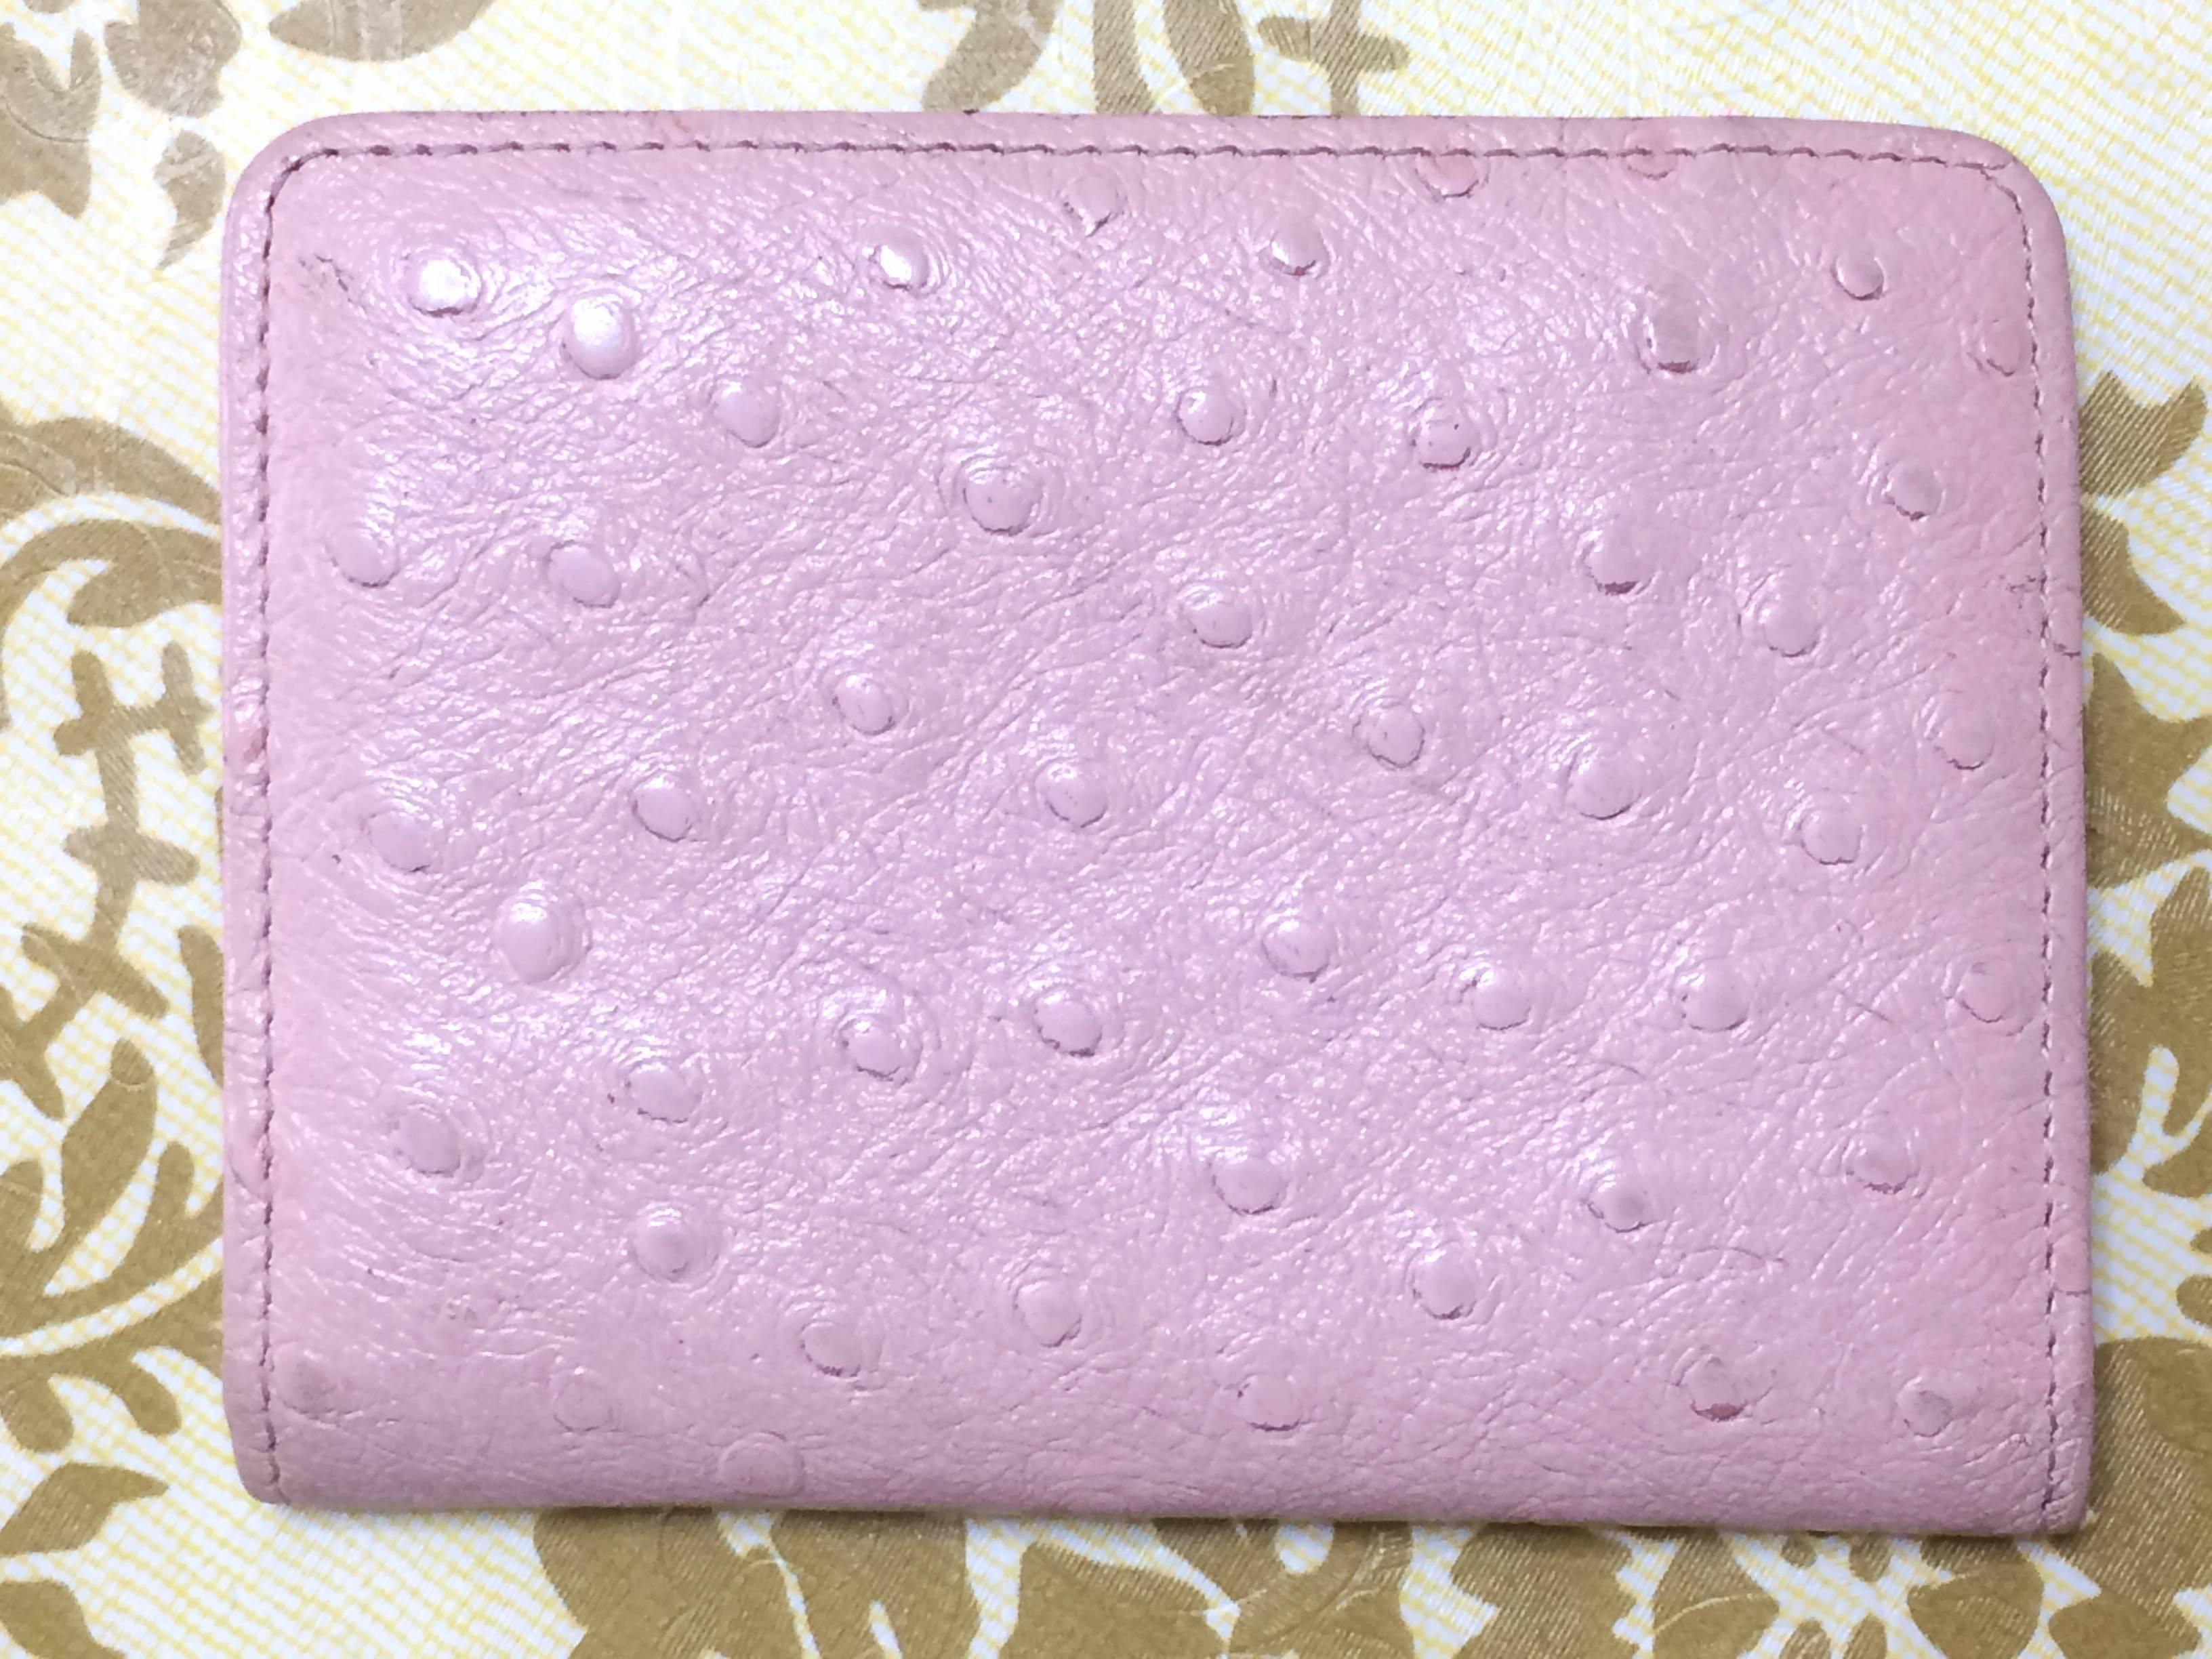 Pink Vintage Gianni Versace ostrich-embossed pink leather card, id case, card case